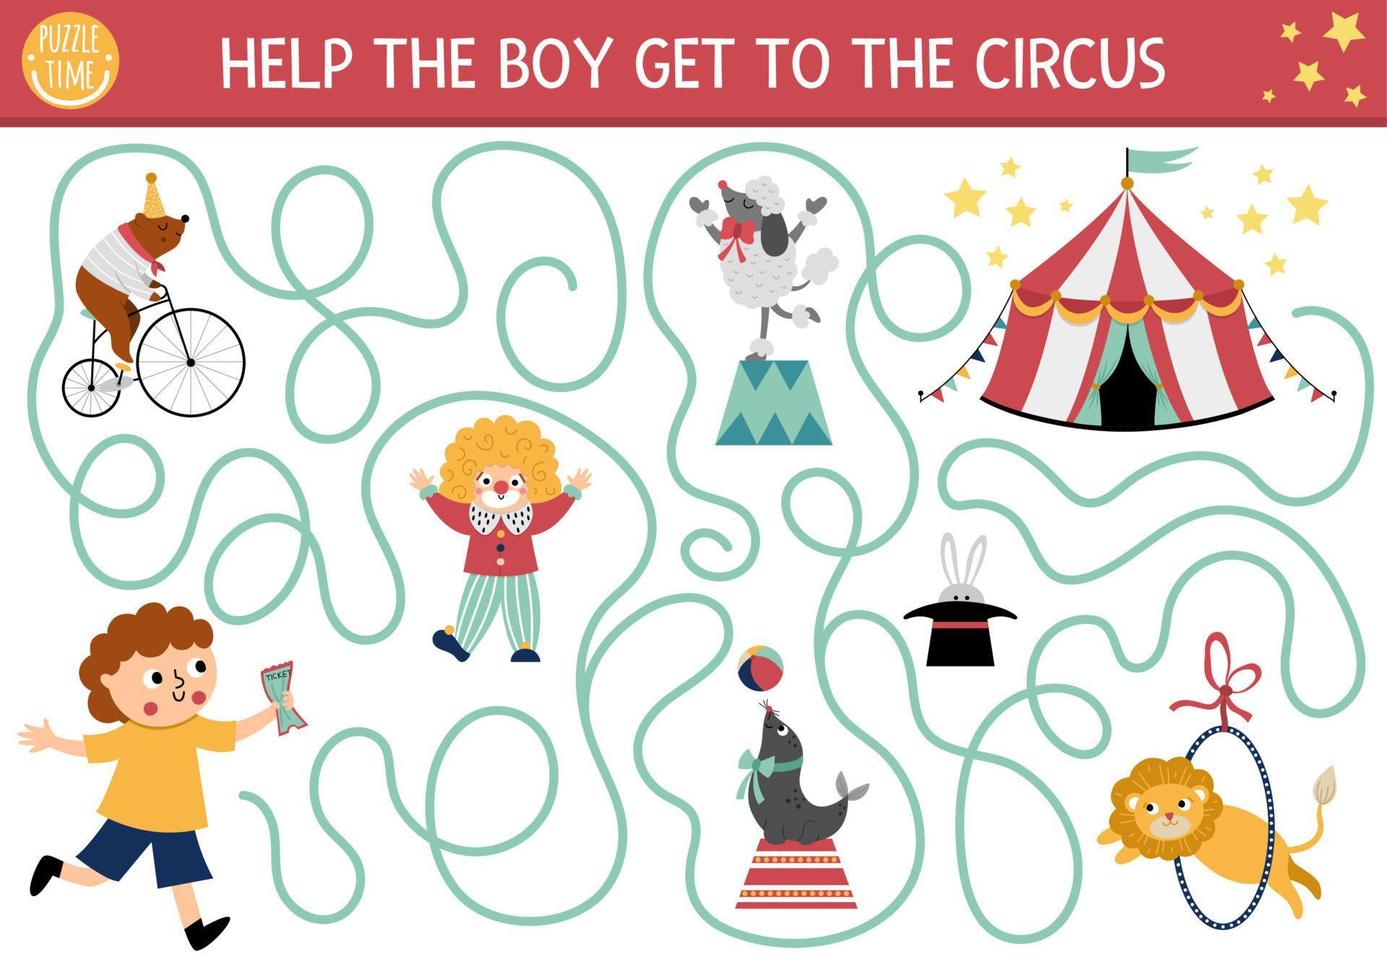 Circus maze for kids with boy running to marquee. Amusement show preschool printable activity with clown, animal performers. Entertainment festival labyrinth game or puzzle vector